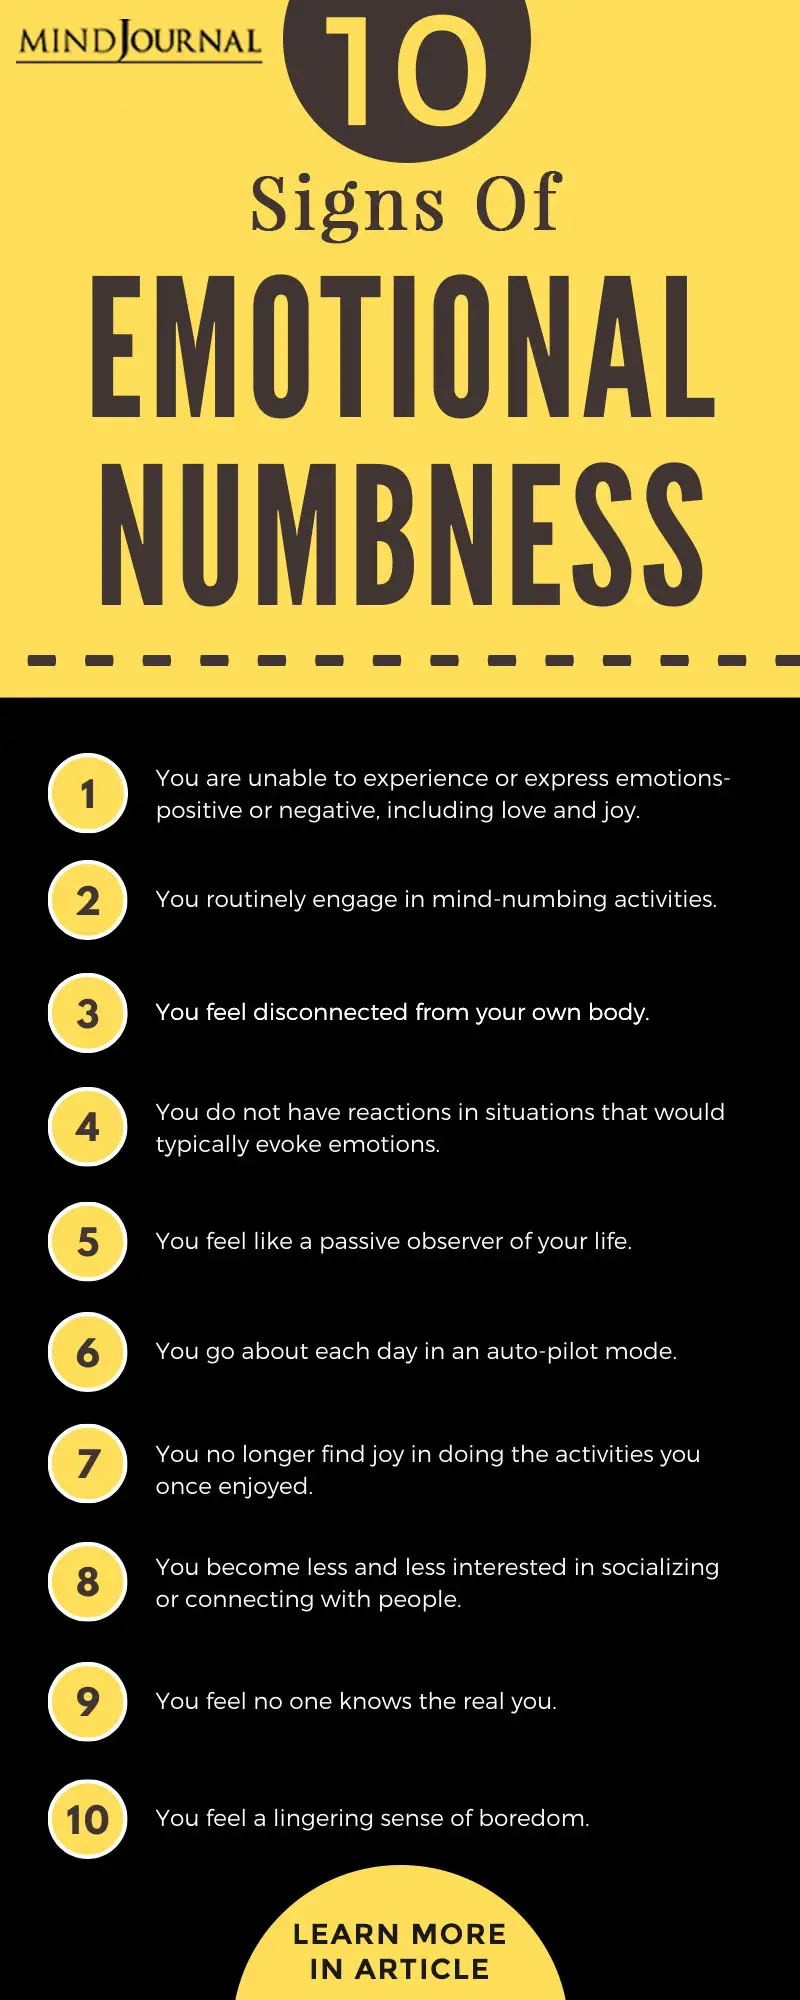 Signs-Of-Emotional-Numbness-Infographic